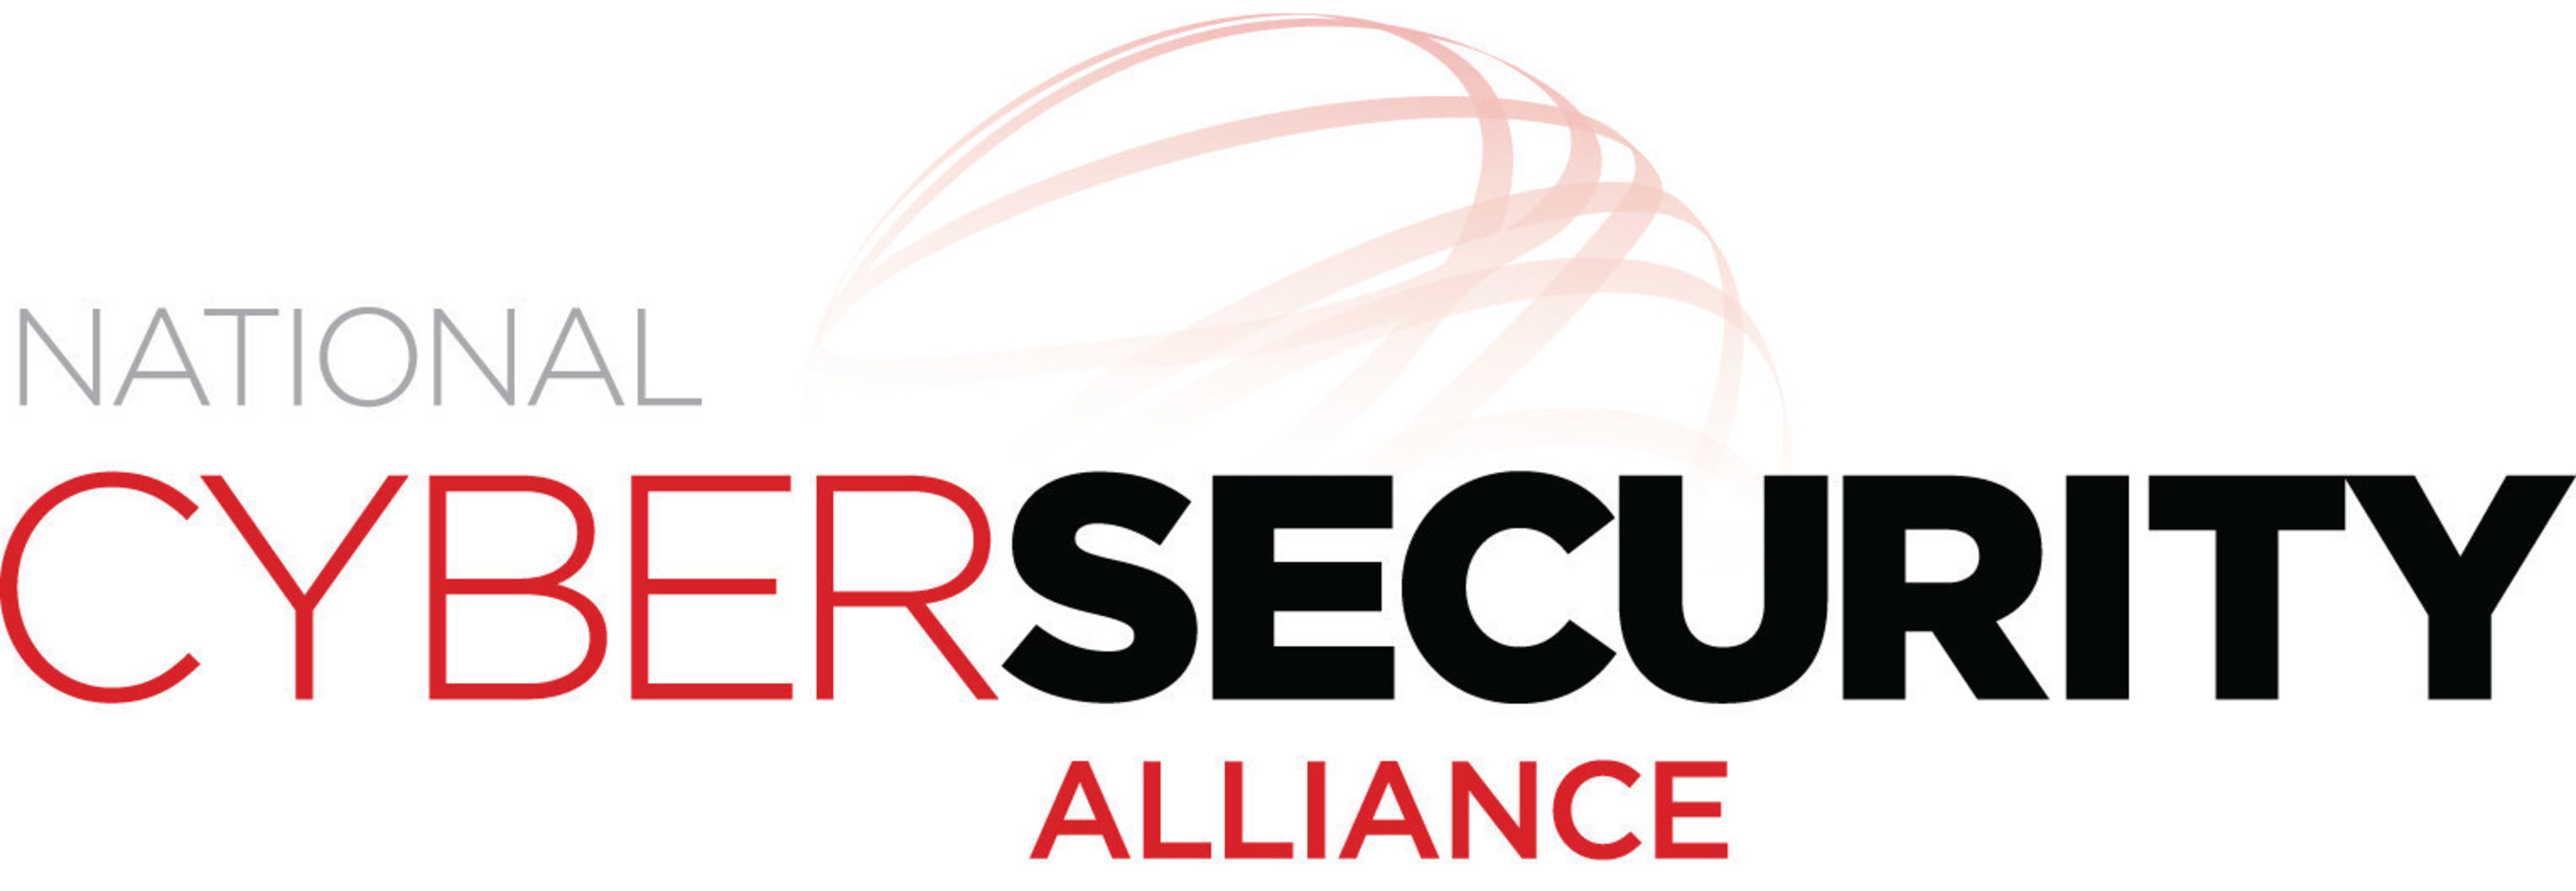 National Cyber Security Alliance (NCSA)